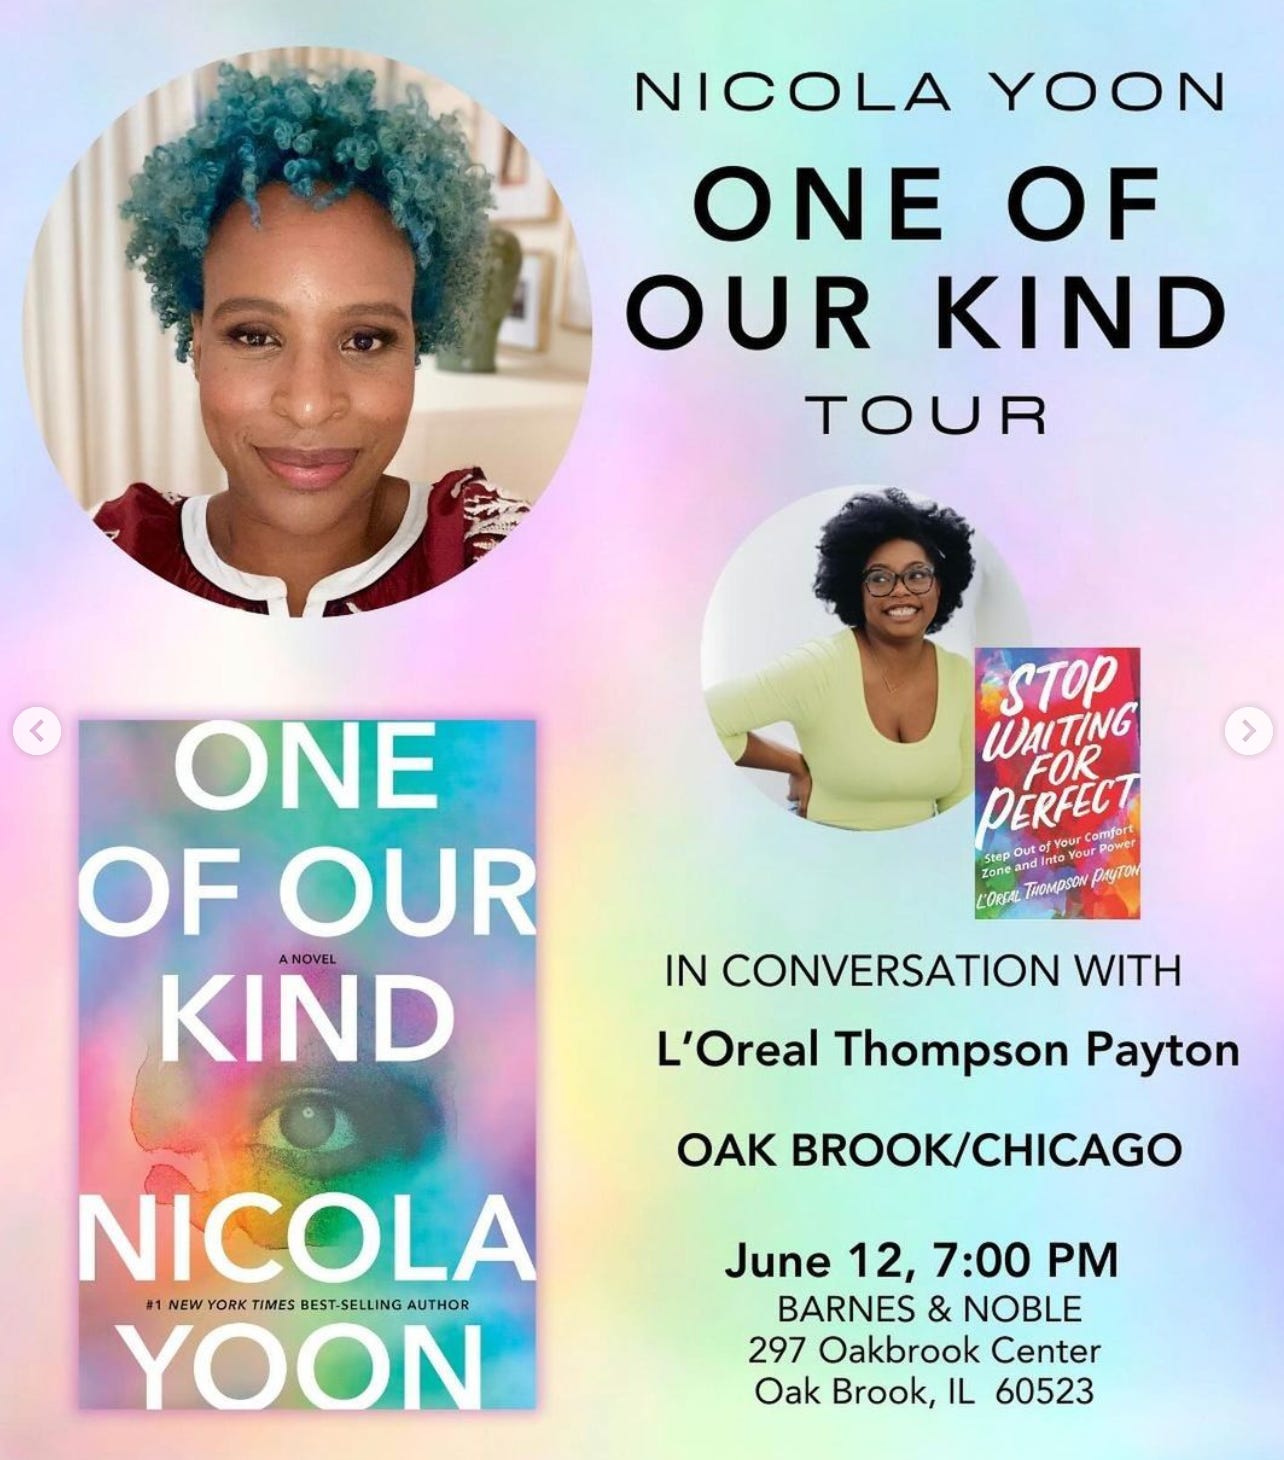 Instagram post promoting a book tour with pictures of the authors, two Black women, and their respective books